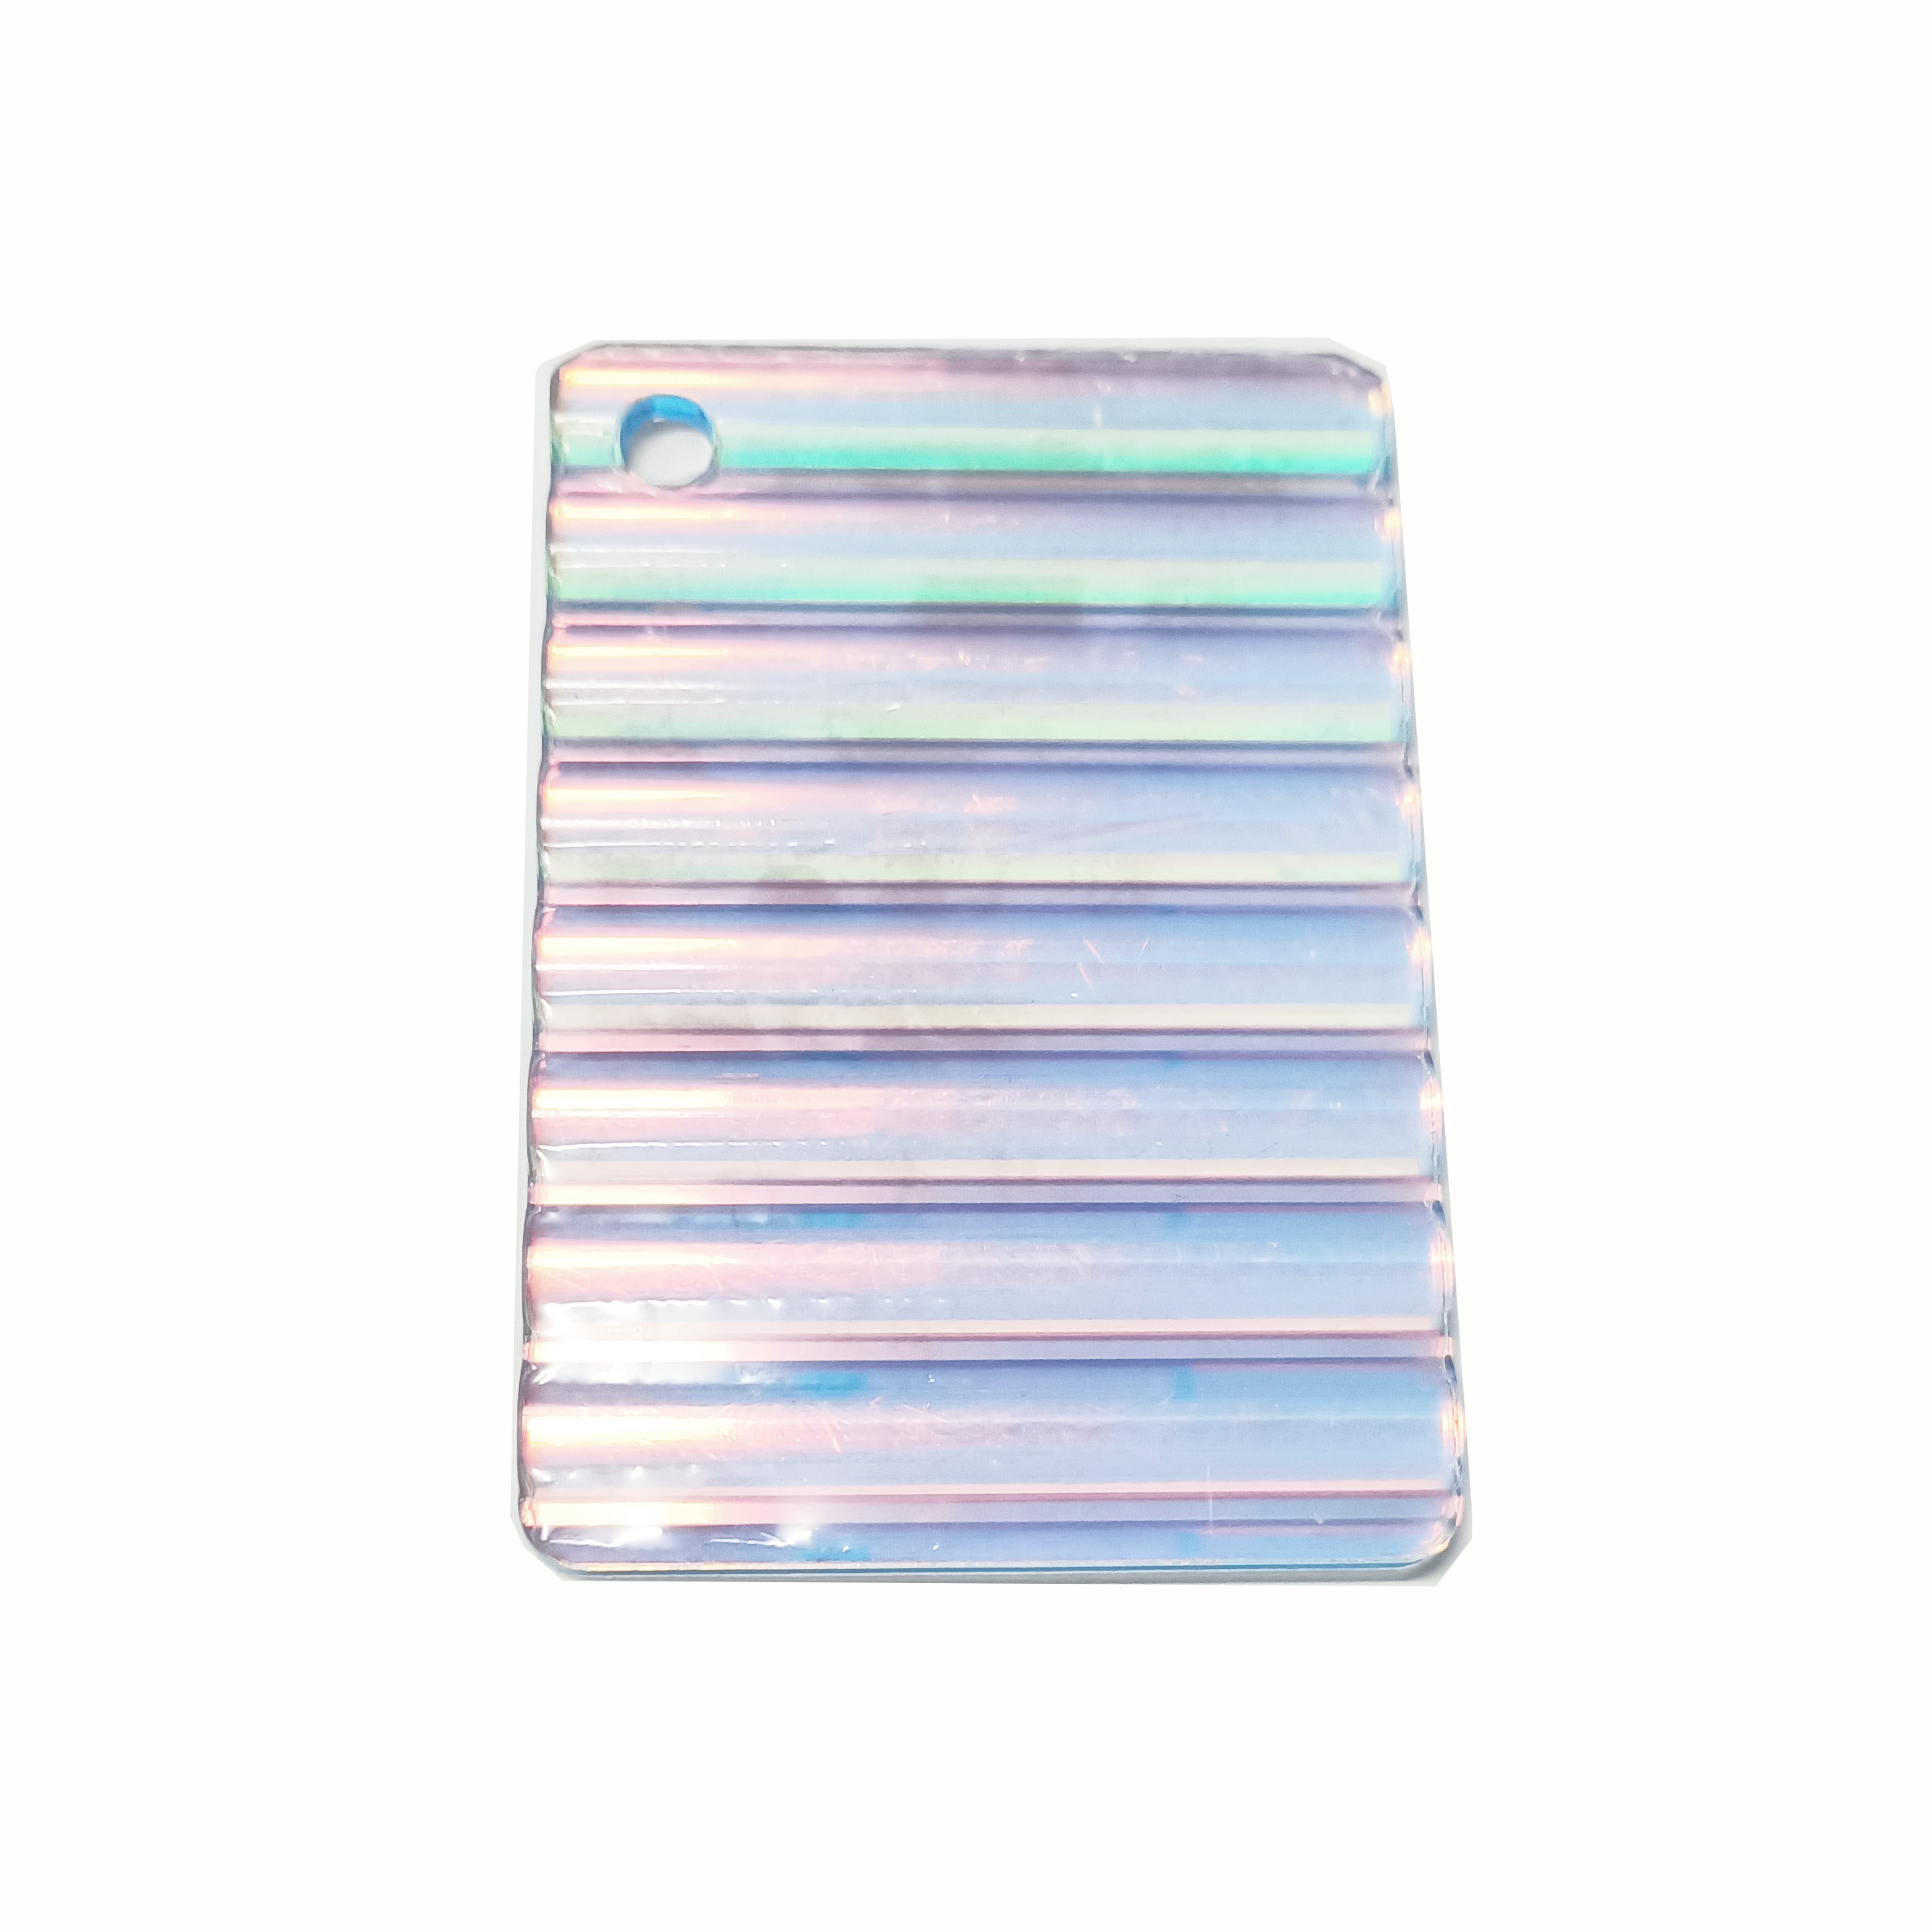 Iridescent Colored Pattern Textured Acrylic Sheets Transparent Glossy Ribbed Textured Acrylic Sheet